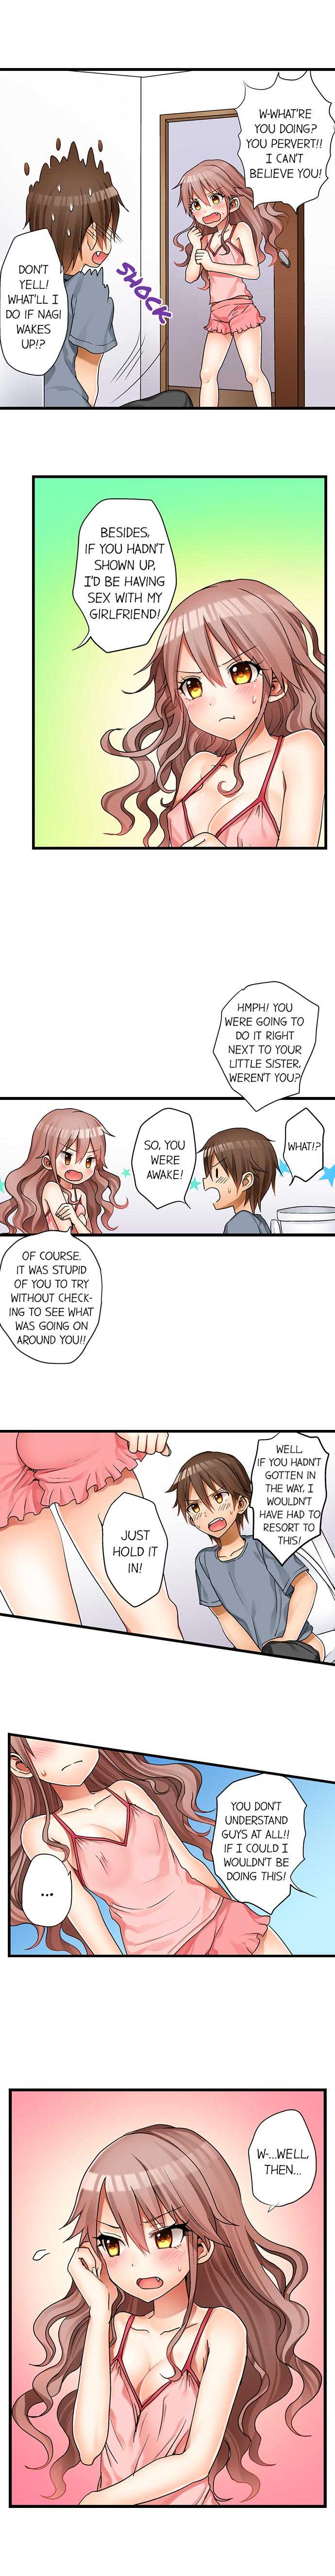 [Porori] Hatsuecchi no Aite wa... Imouto!? | My First Time is with.... My Little Sister?! Ch. 1-72 [English] [Ongoing] - Page 23